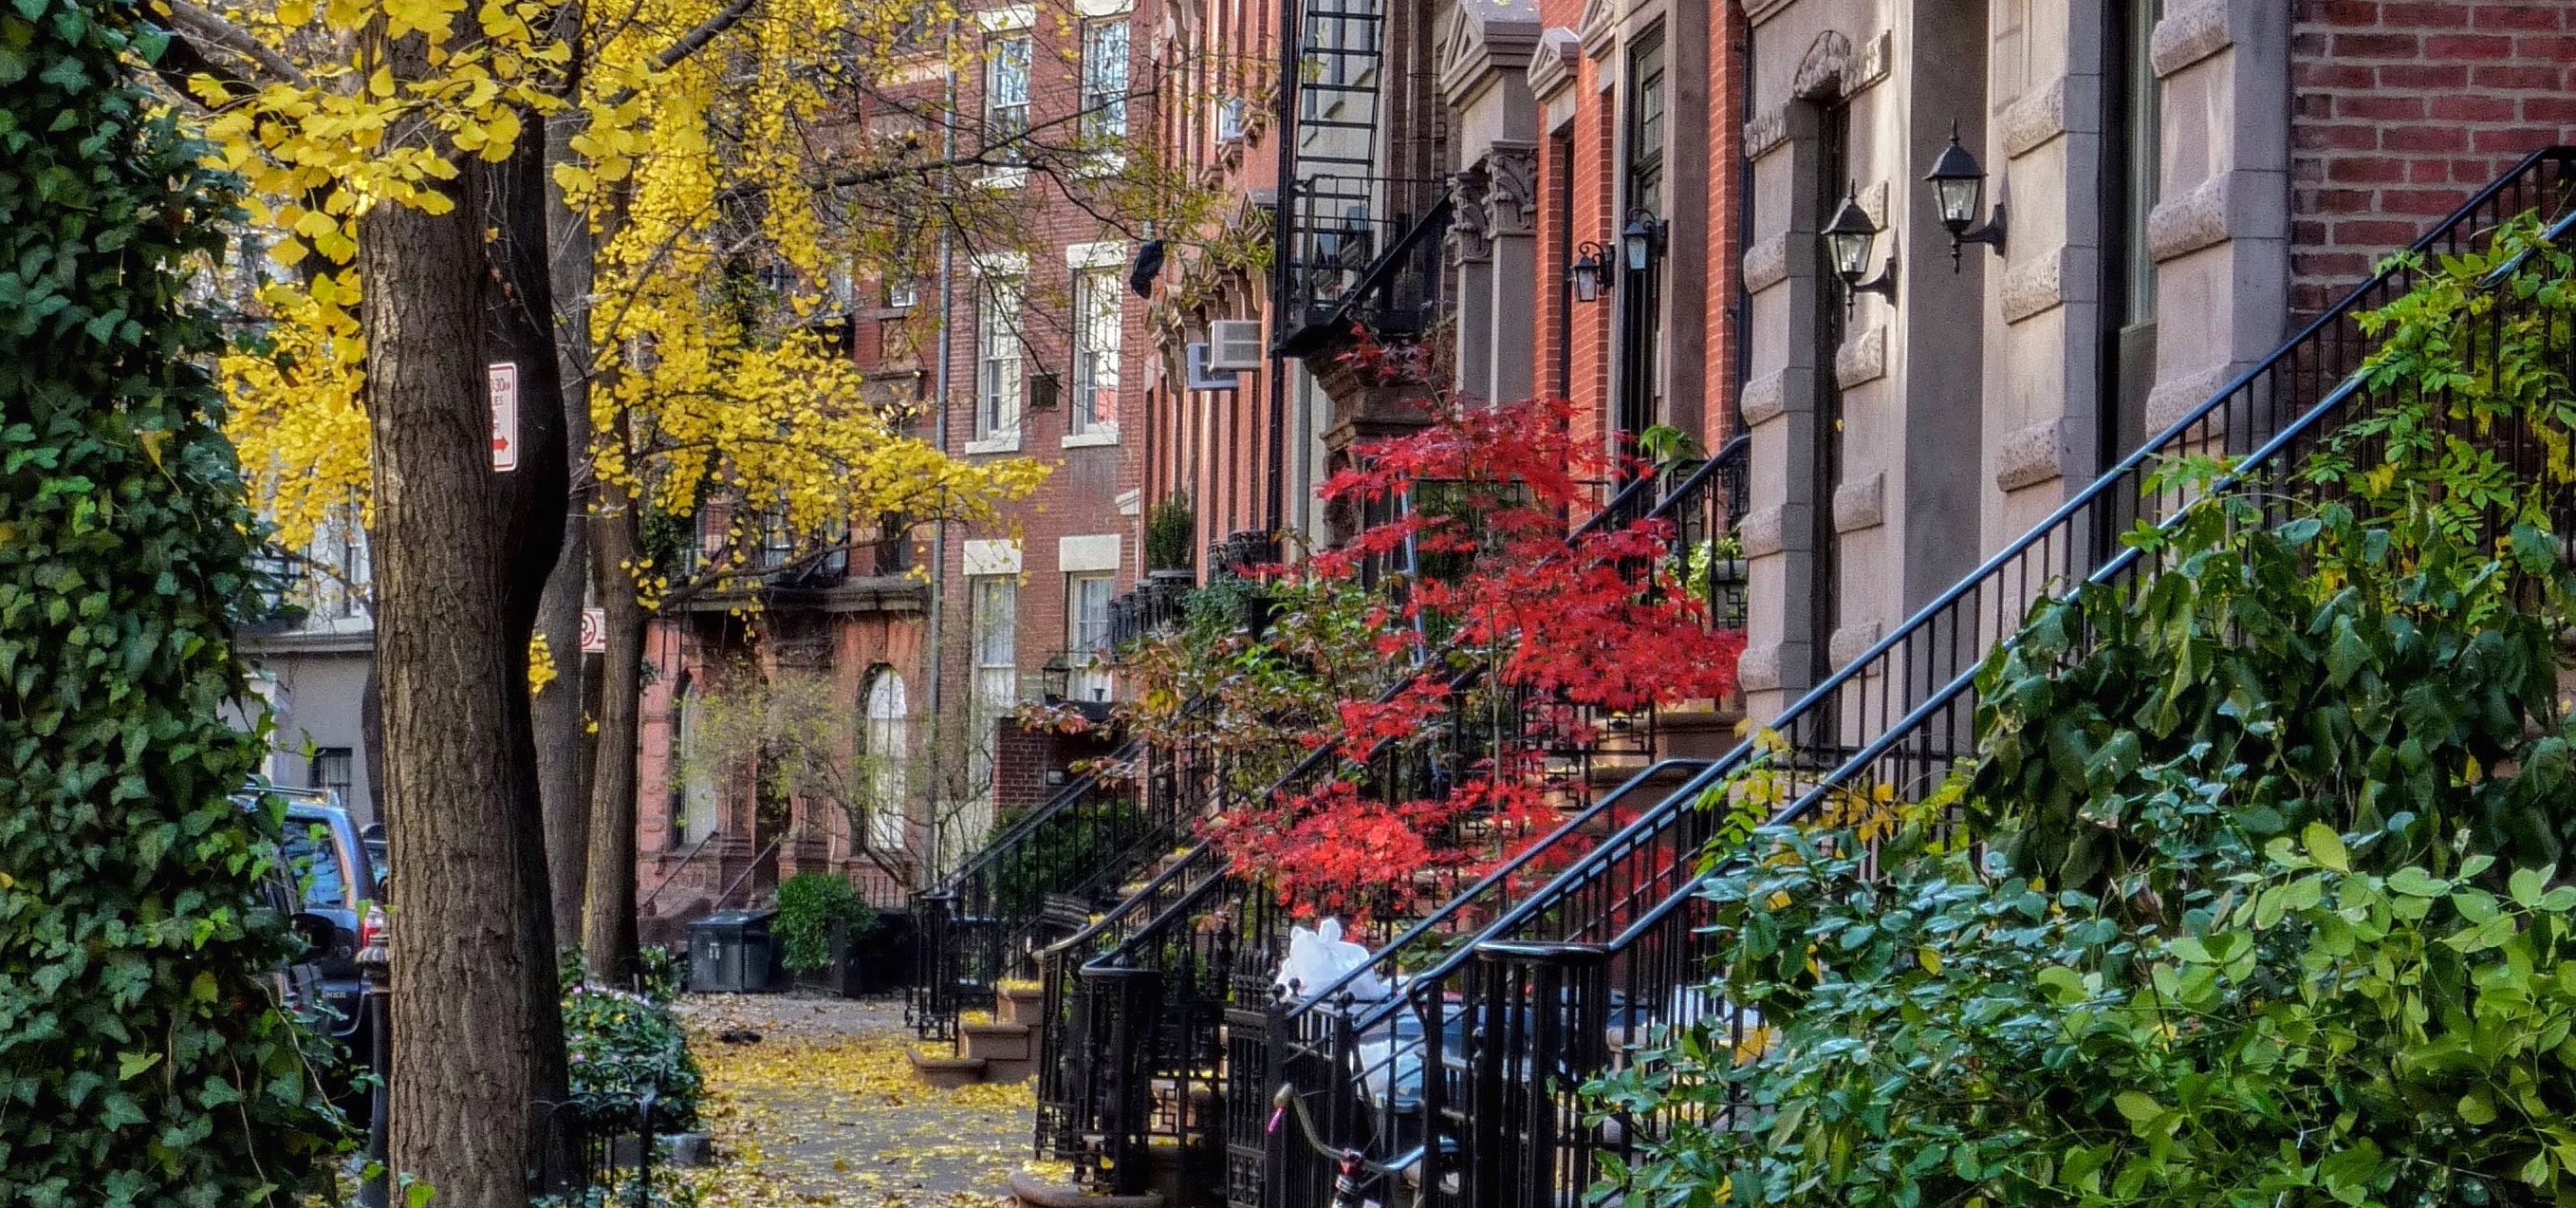 photo of new york city near me in west village, SoHo, Chelsea & Tribeca to promote house cleaning services on Village Home Cleaning's website